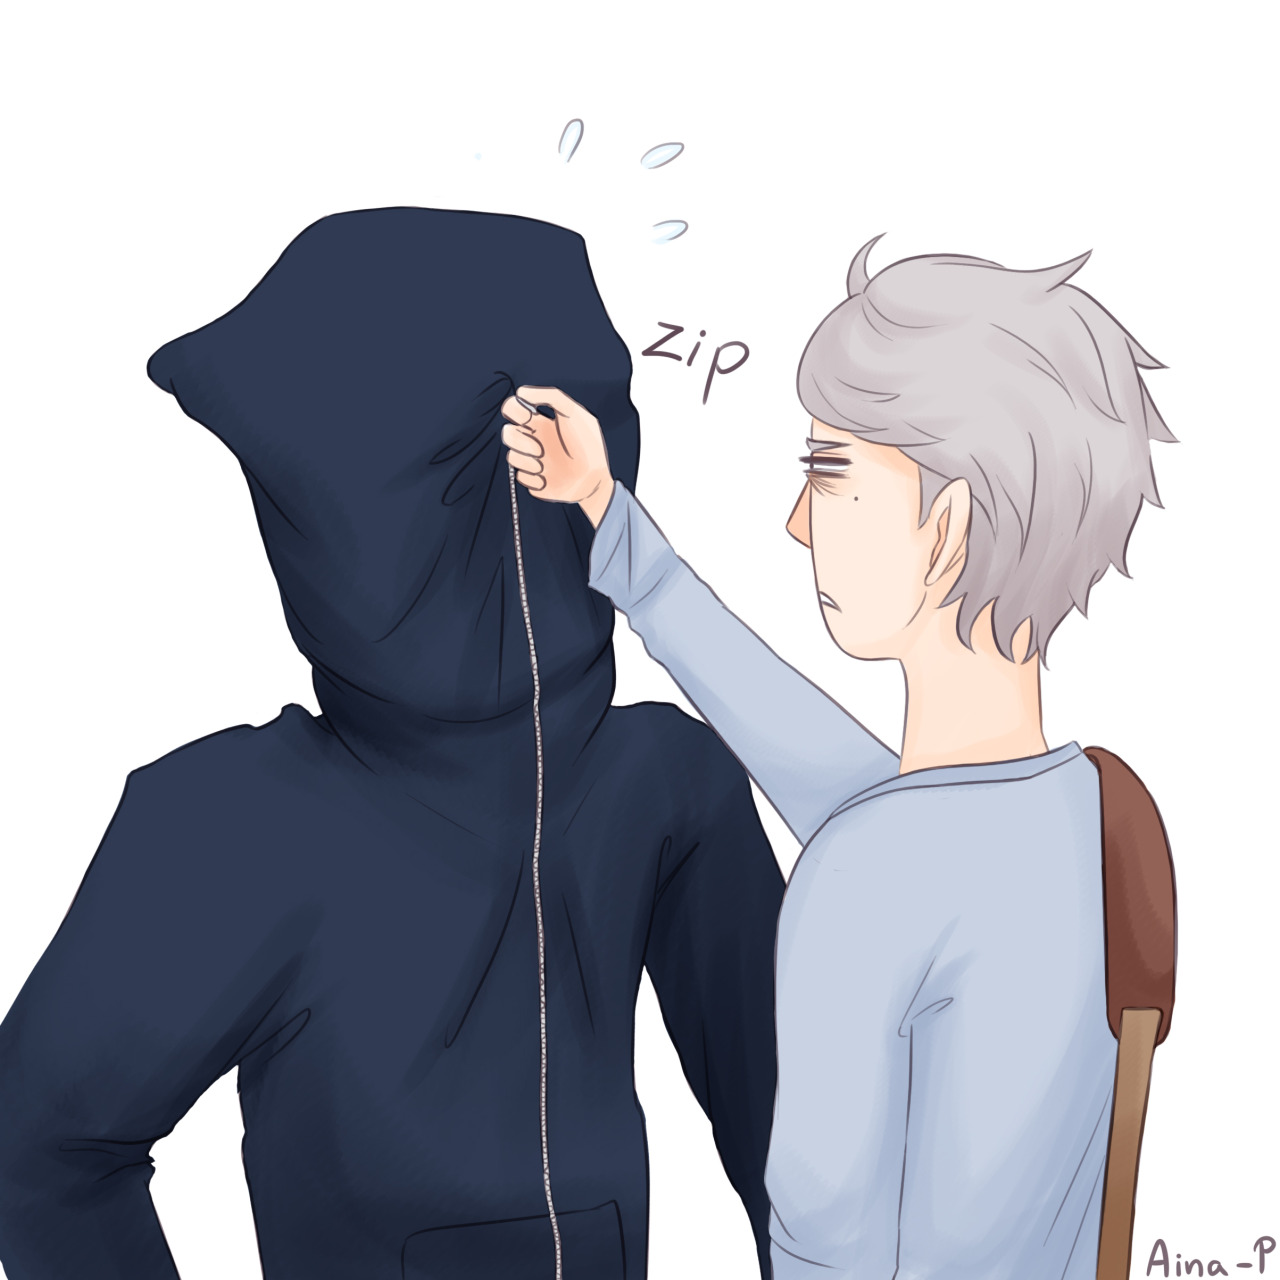 aina-p:  That was too much even for Suga…  … But not really. 